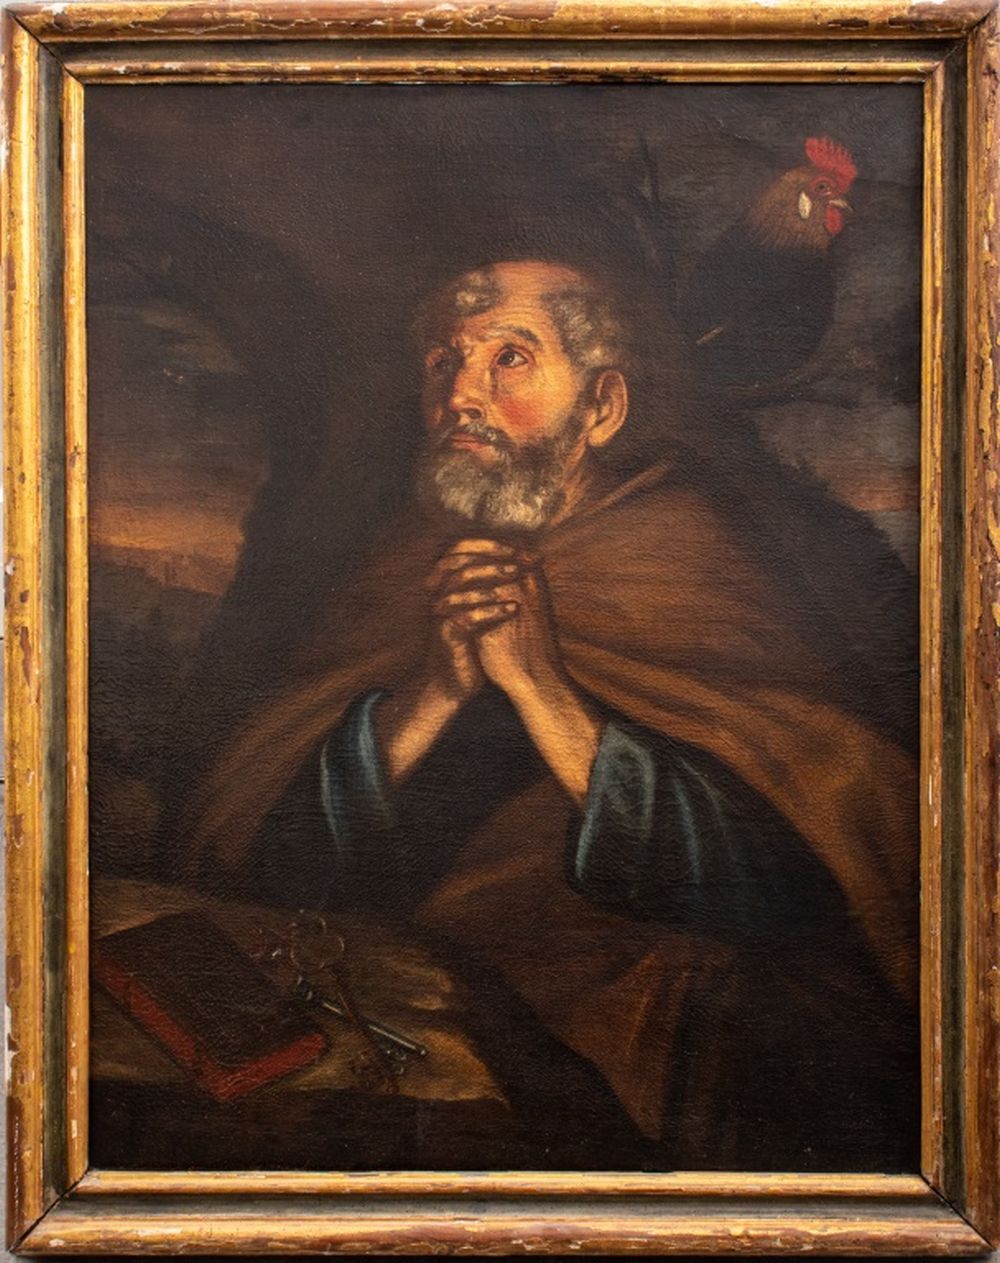 OLD MASTER OIL PAINTING OF SAINT 3b4e57